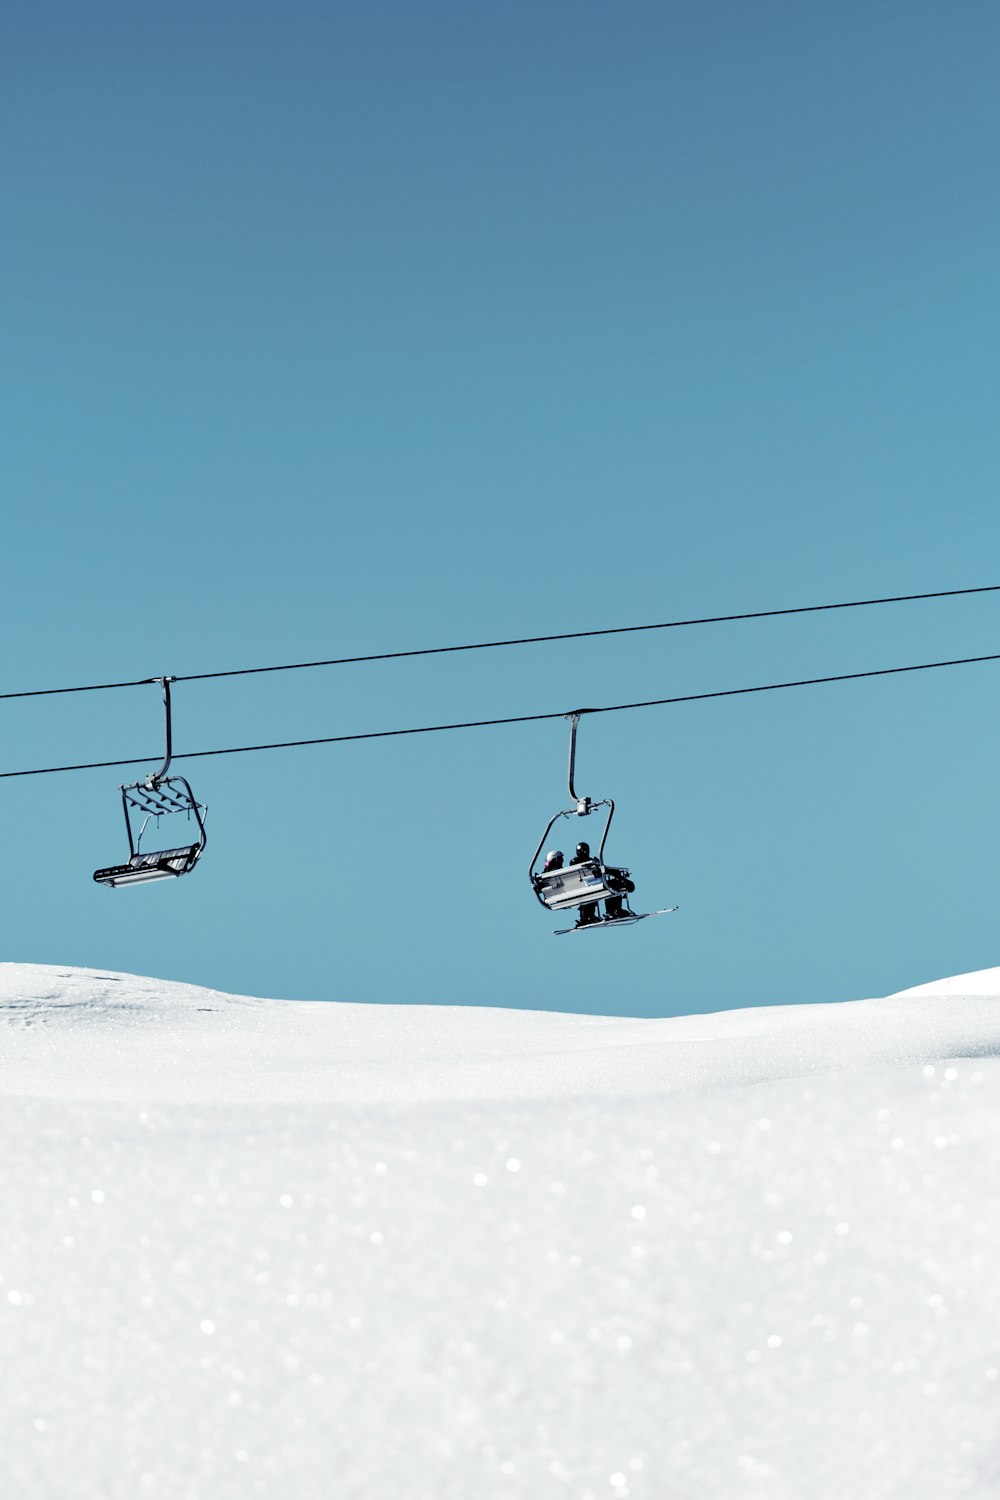 a ski lift with two skiers going up a snowy hill